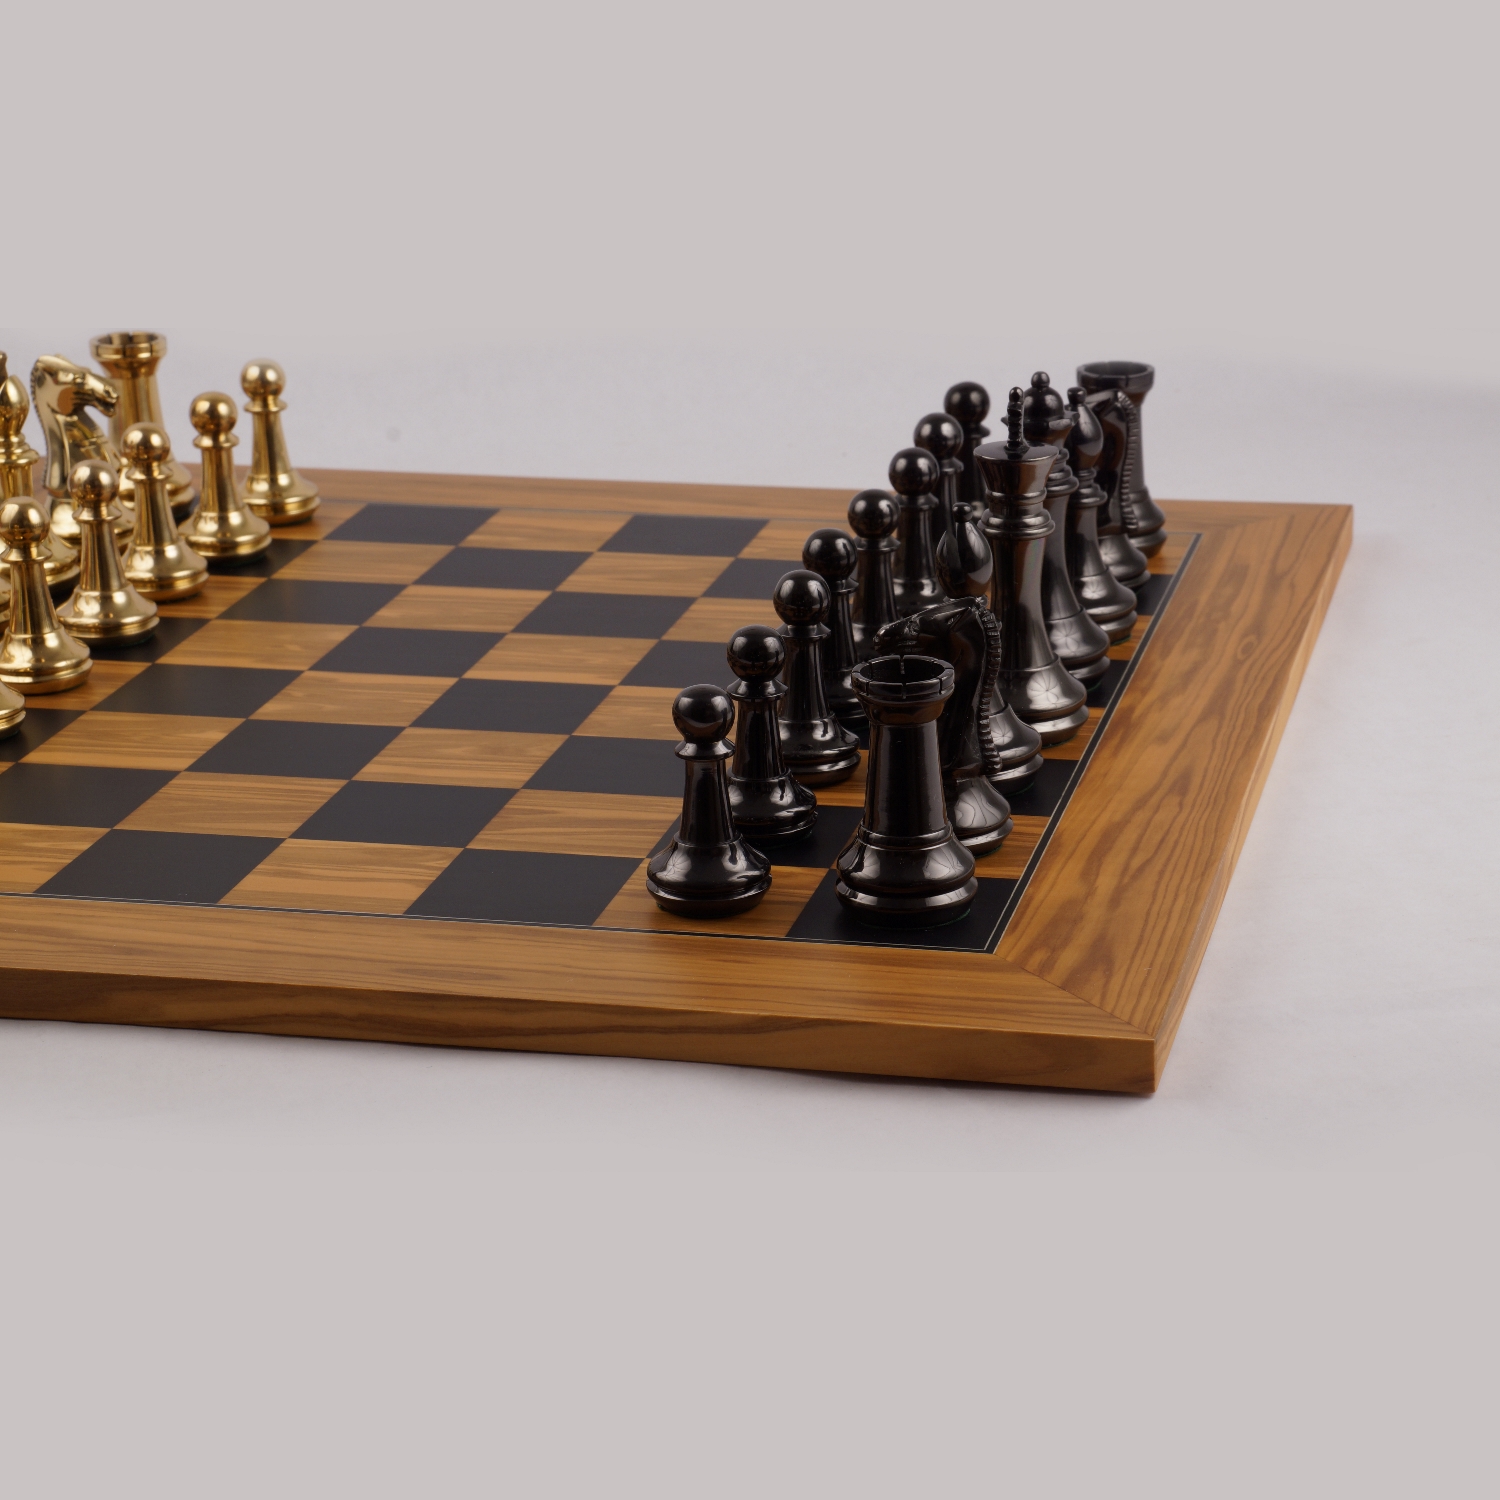 20" MoW Black and Olive Chancellor Chess Board